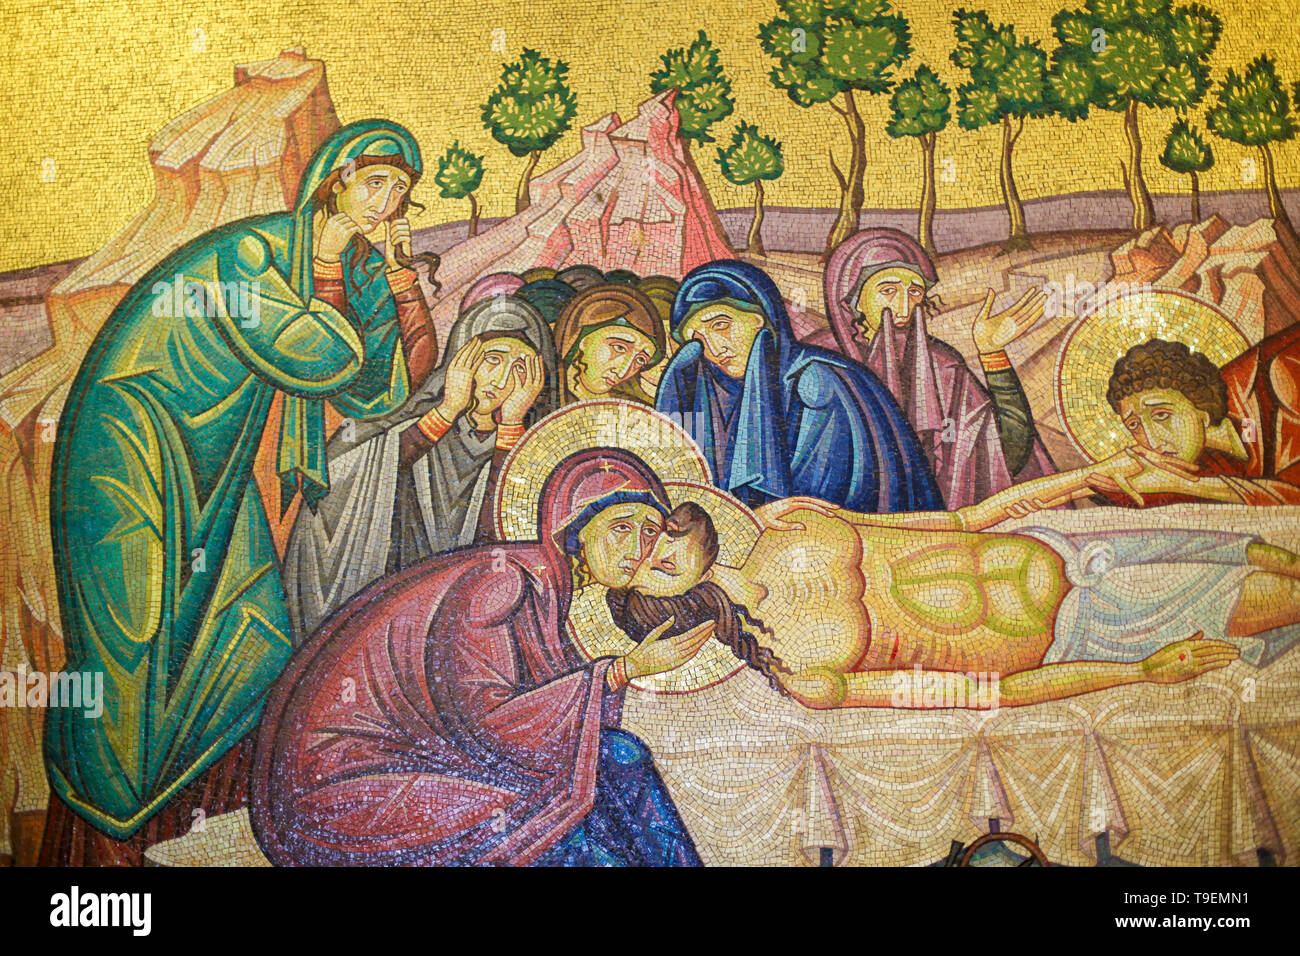 A mosaic depiction of Christ's body being prepared after his death, opposite the Stone of Anointing, in the Church of the Holy Sepulchre in Jerusalem. Stock Photo